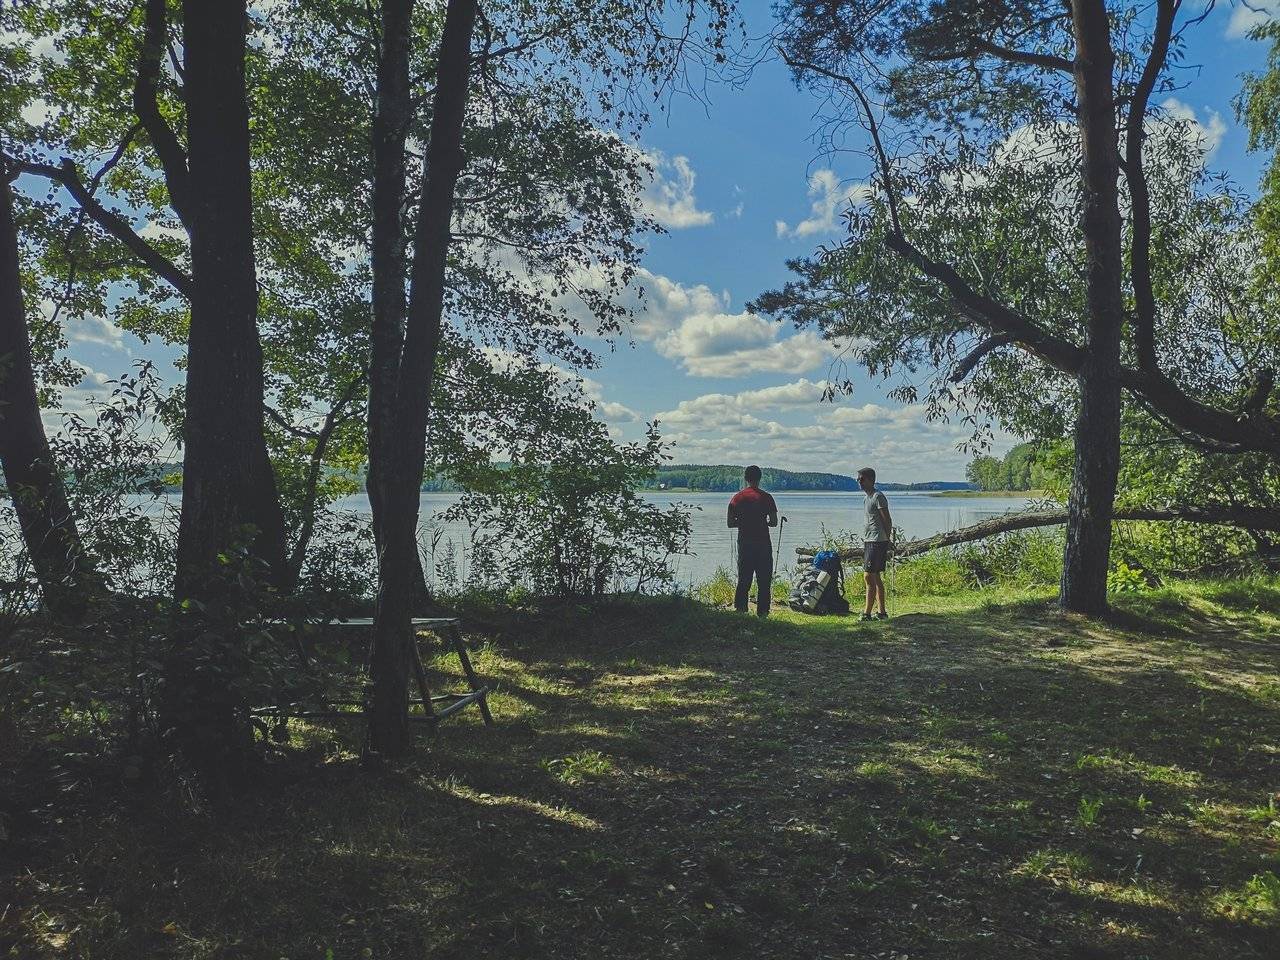   Taking on a trail near White Lakajai lake in Labanoras regional park, Lithuania. Photo Alis Monte [CC BY-SA 4.0], via Connecting the Dots